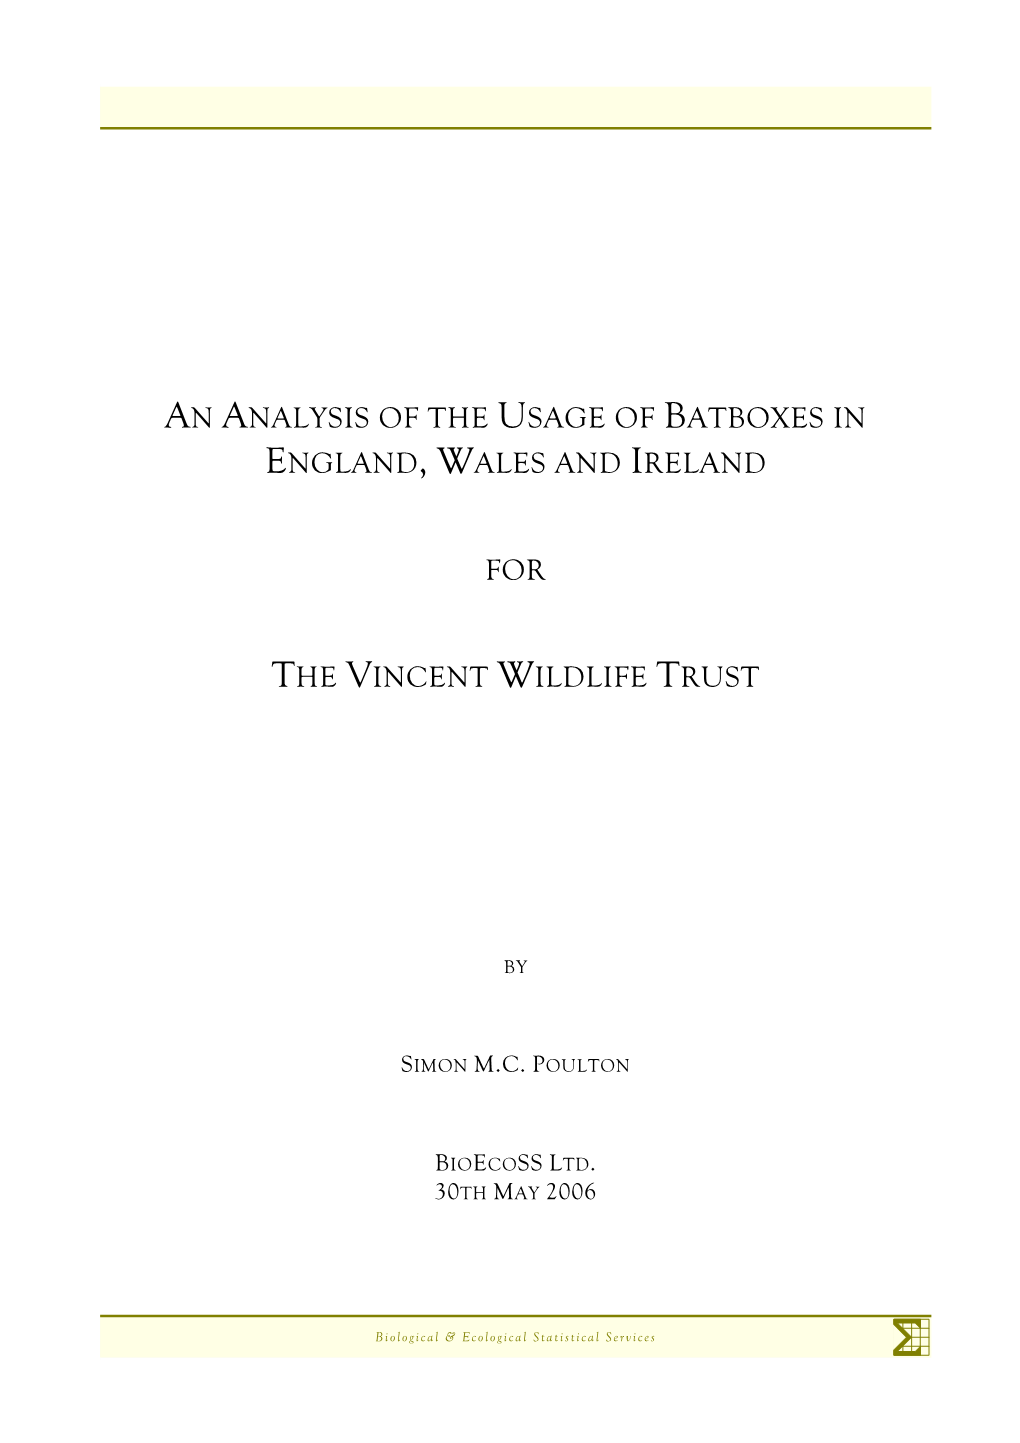 An Analysis of the Usage of Bat Boxes